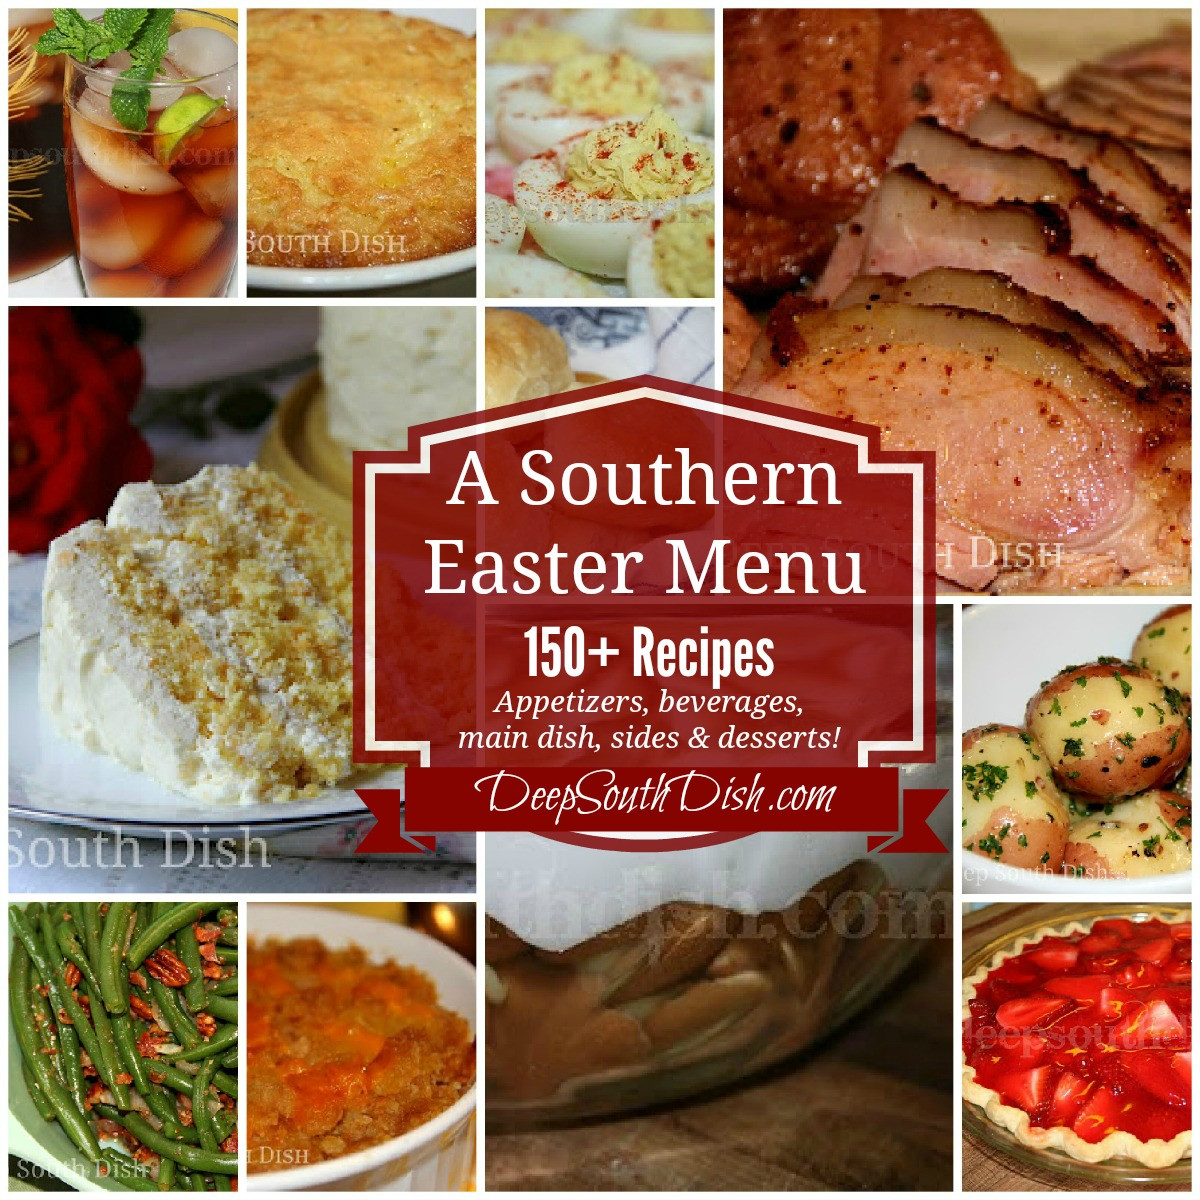 Southern Easter Dinner Menu
 Deep South Dish Southern Easter Menu Ideas and Recipes